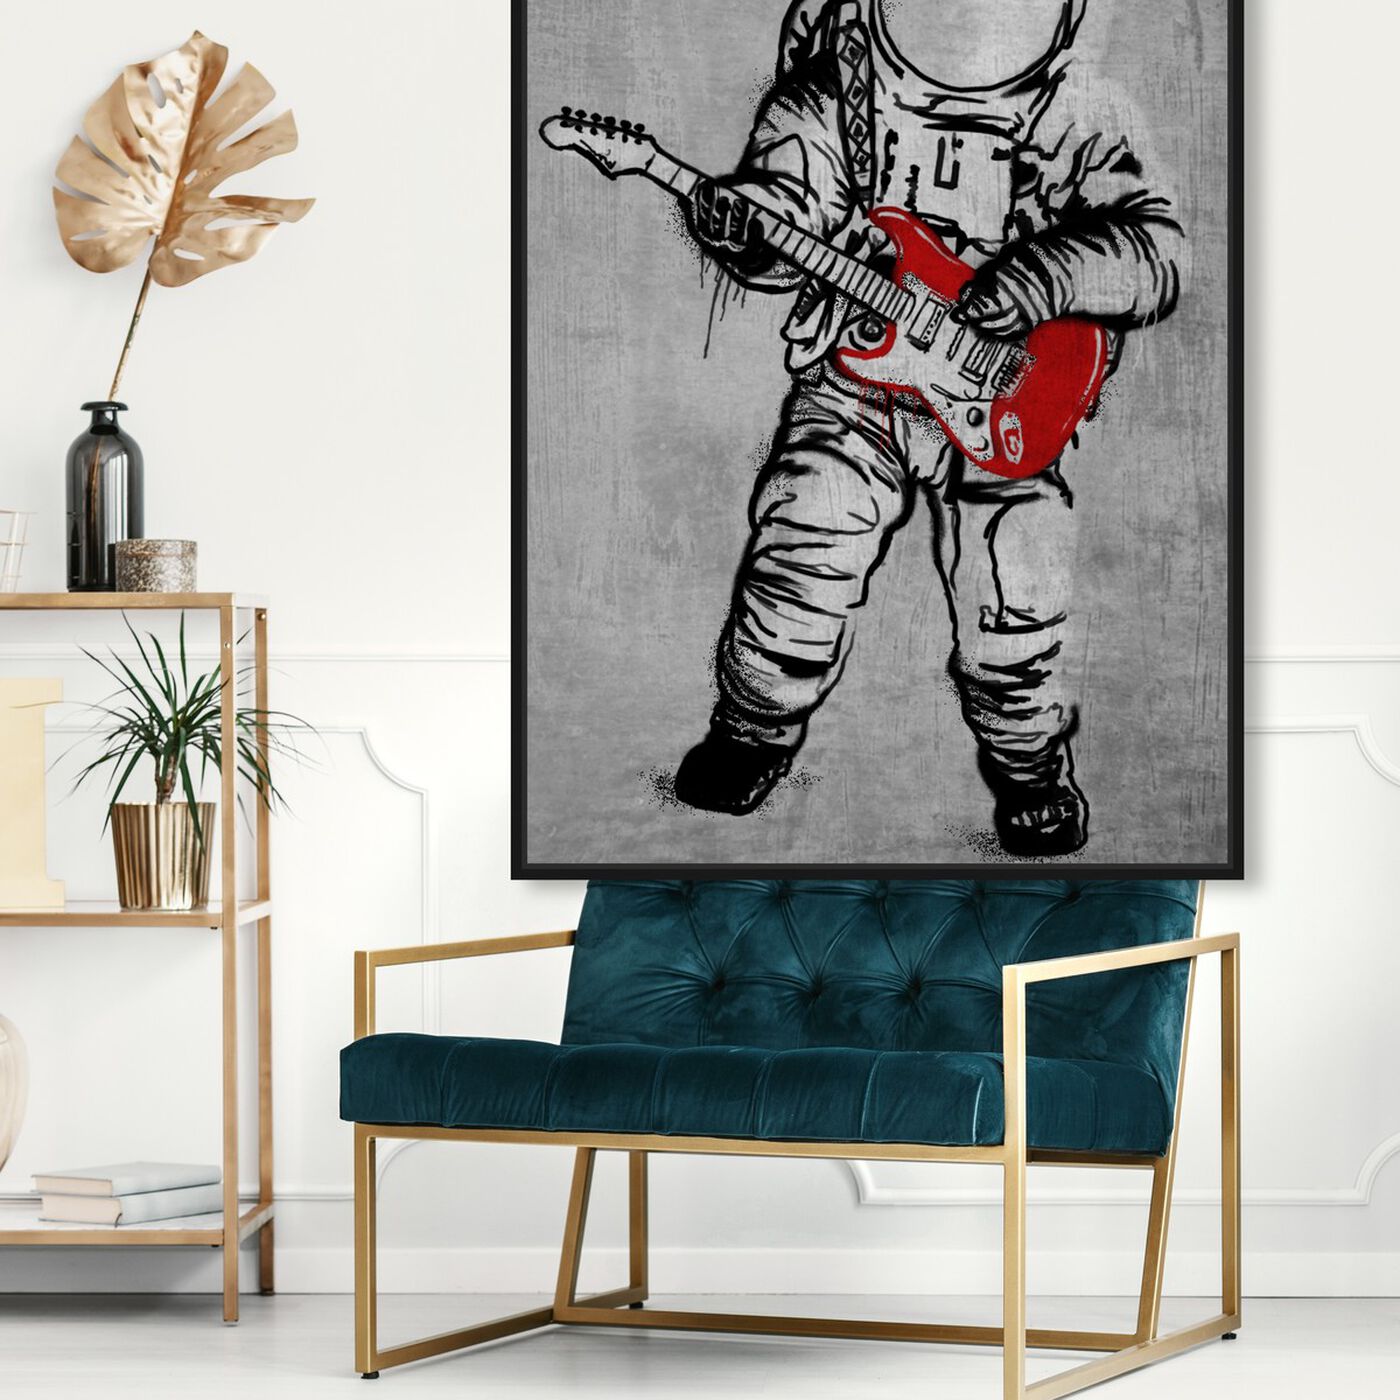 Hanging view of Moontunes featuring astronomy and space and astronaut art.